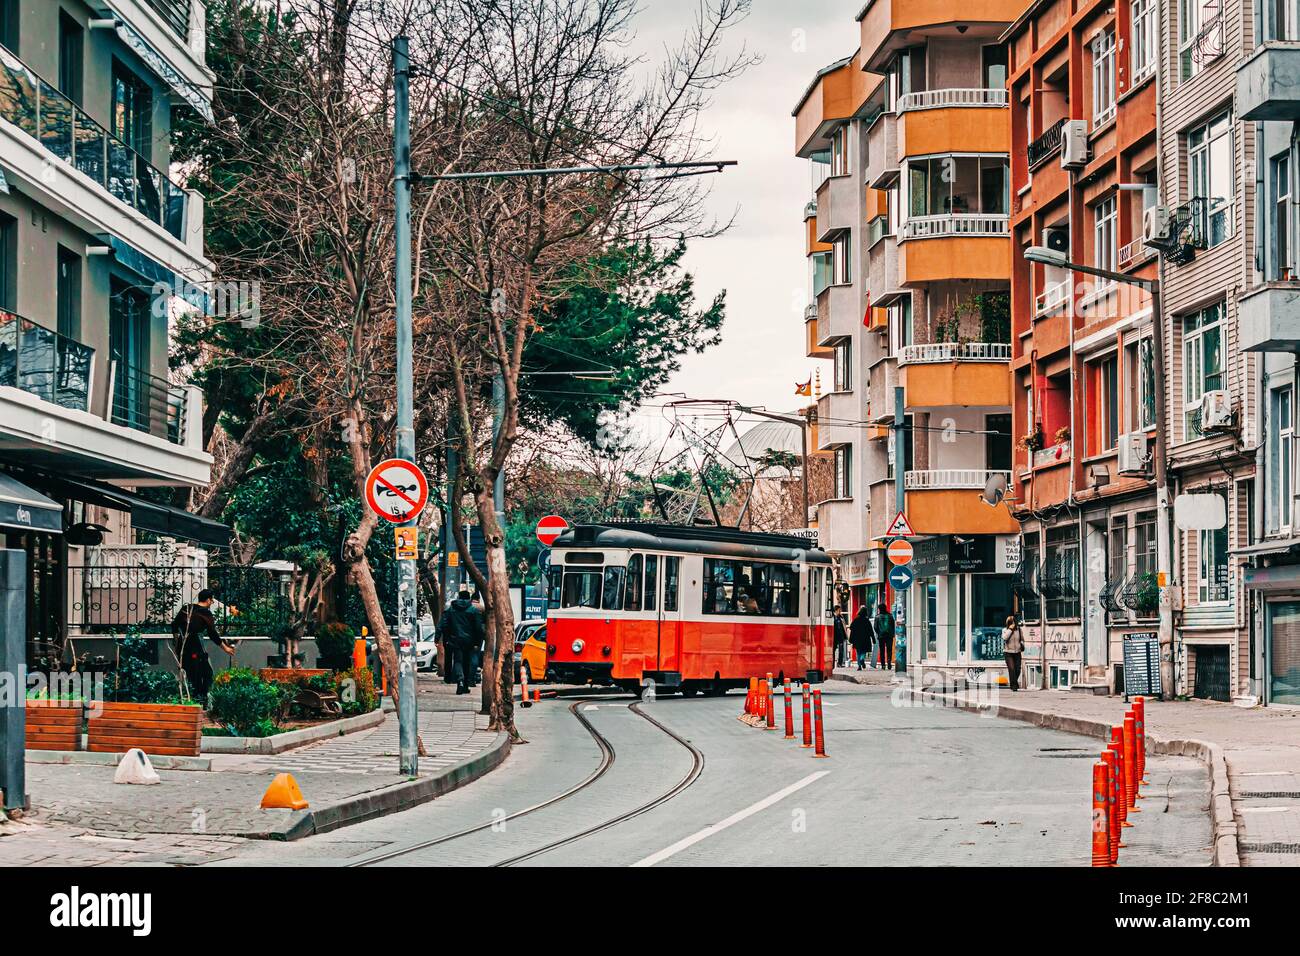 Istanbul, Turkey: March 15, 2018: Kadikoy - Moda nostalgic tramway. The trendy neighborhood is full of colorfull buildings in the Asian side of Istanbul. Stock Photo